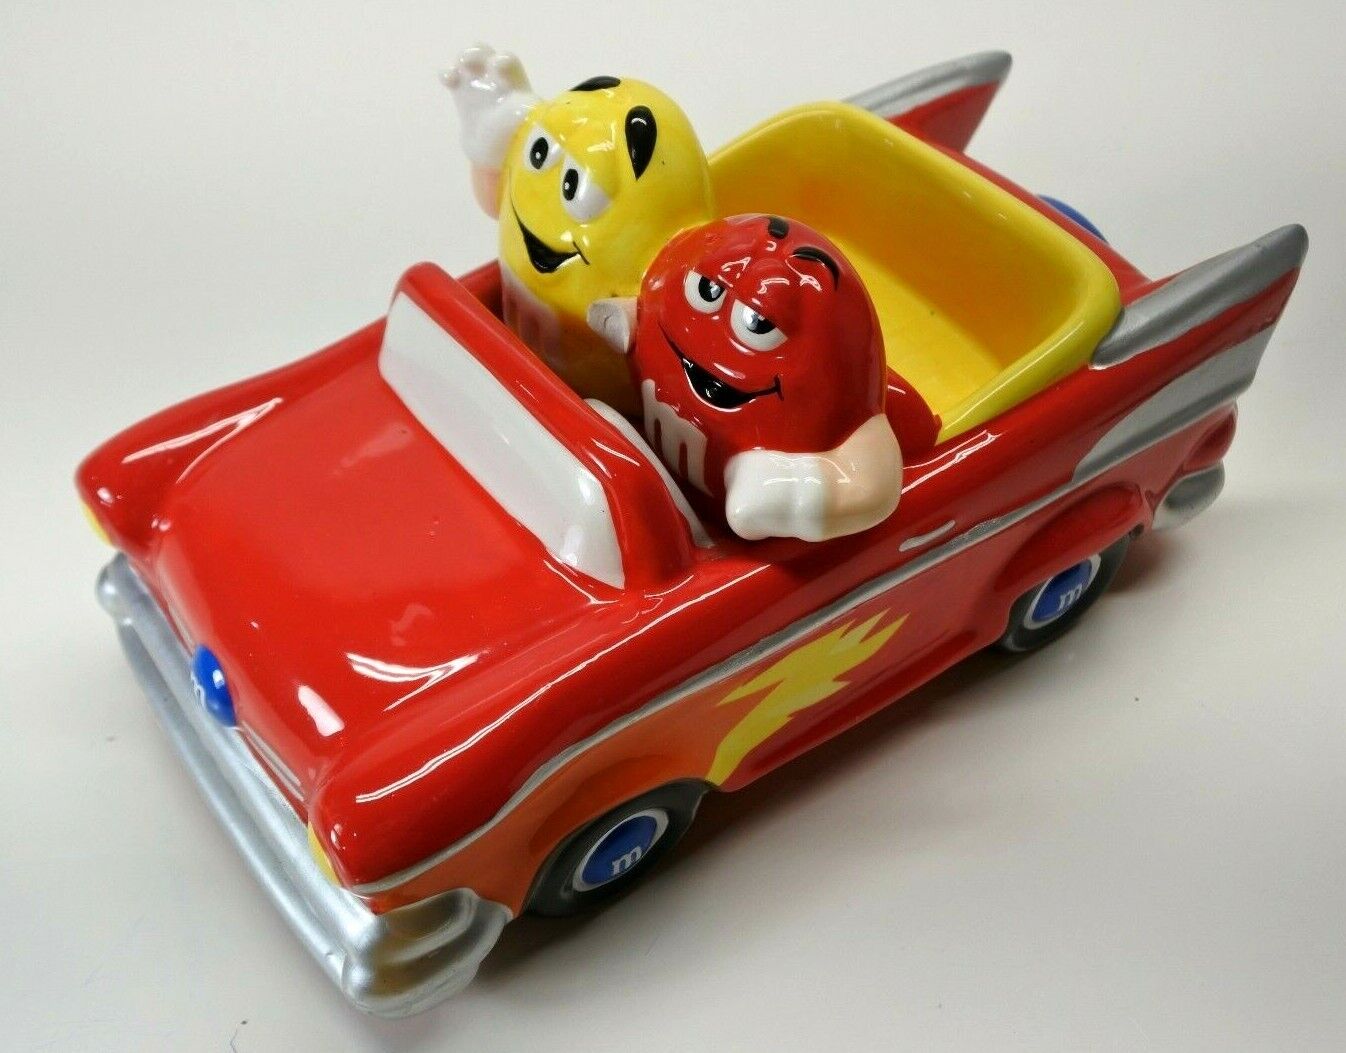 M&M Red 57 Chevy Hot Rod Candy Nut Dish White and Yellow Flames - Good Condition